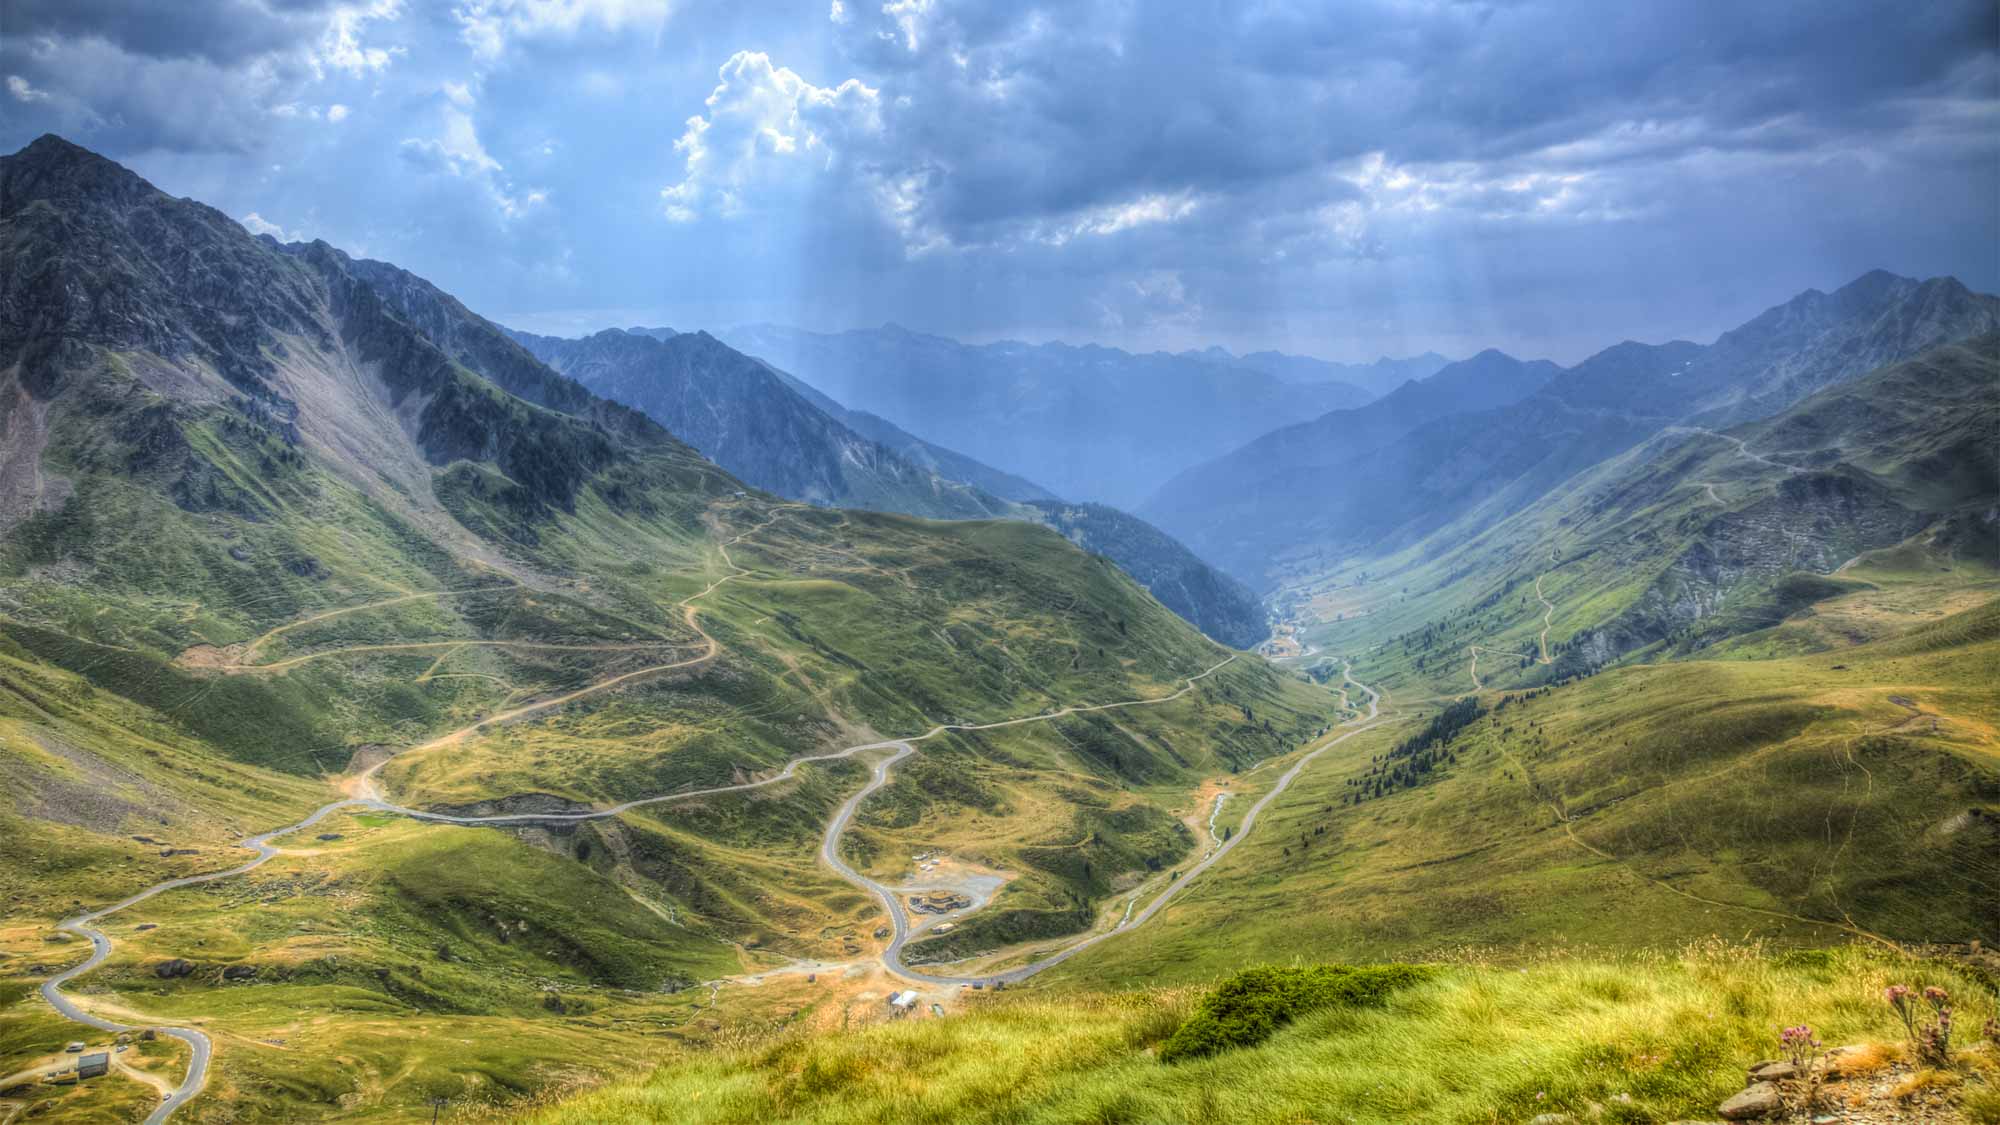 Cycling the Pyrenees: the best regions, towns and routes for road cyclists